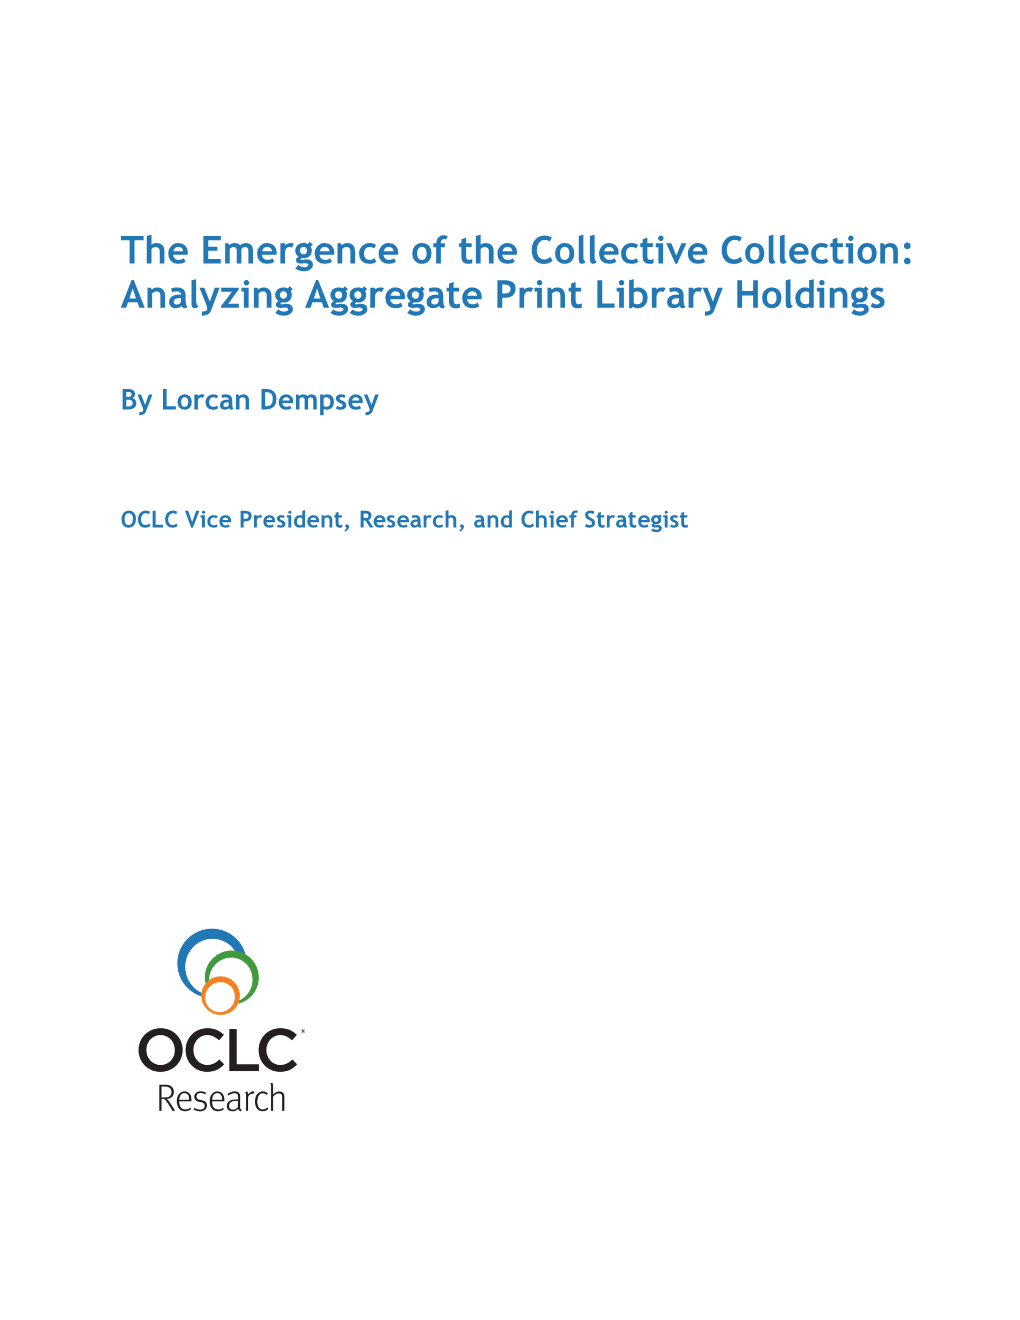 The Emergence of the Collective Collection: Analyzing Aggregate Print Library Holdings